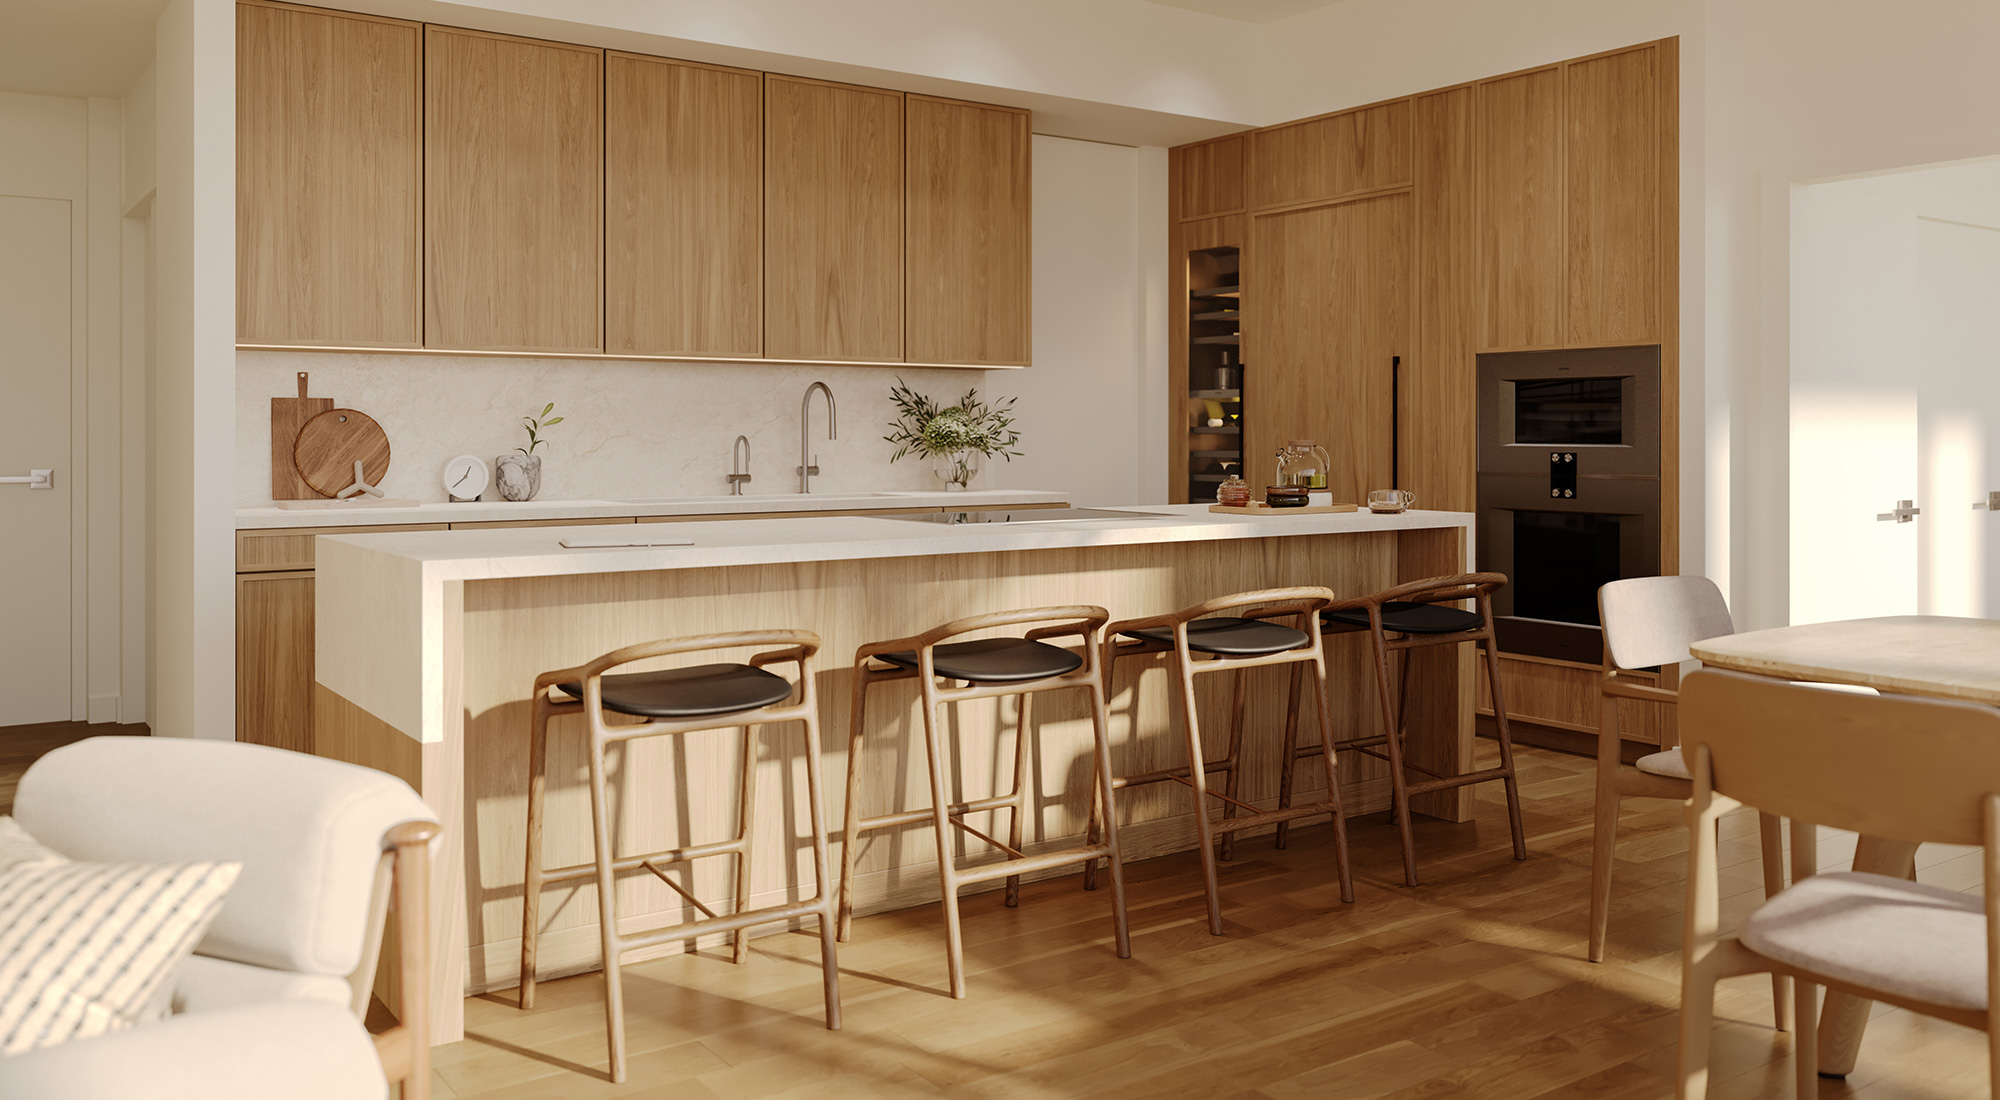 Kitchen with island and seating